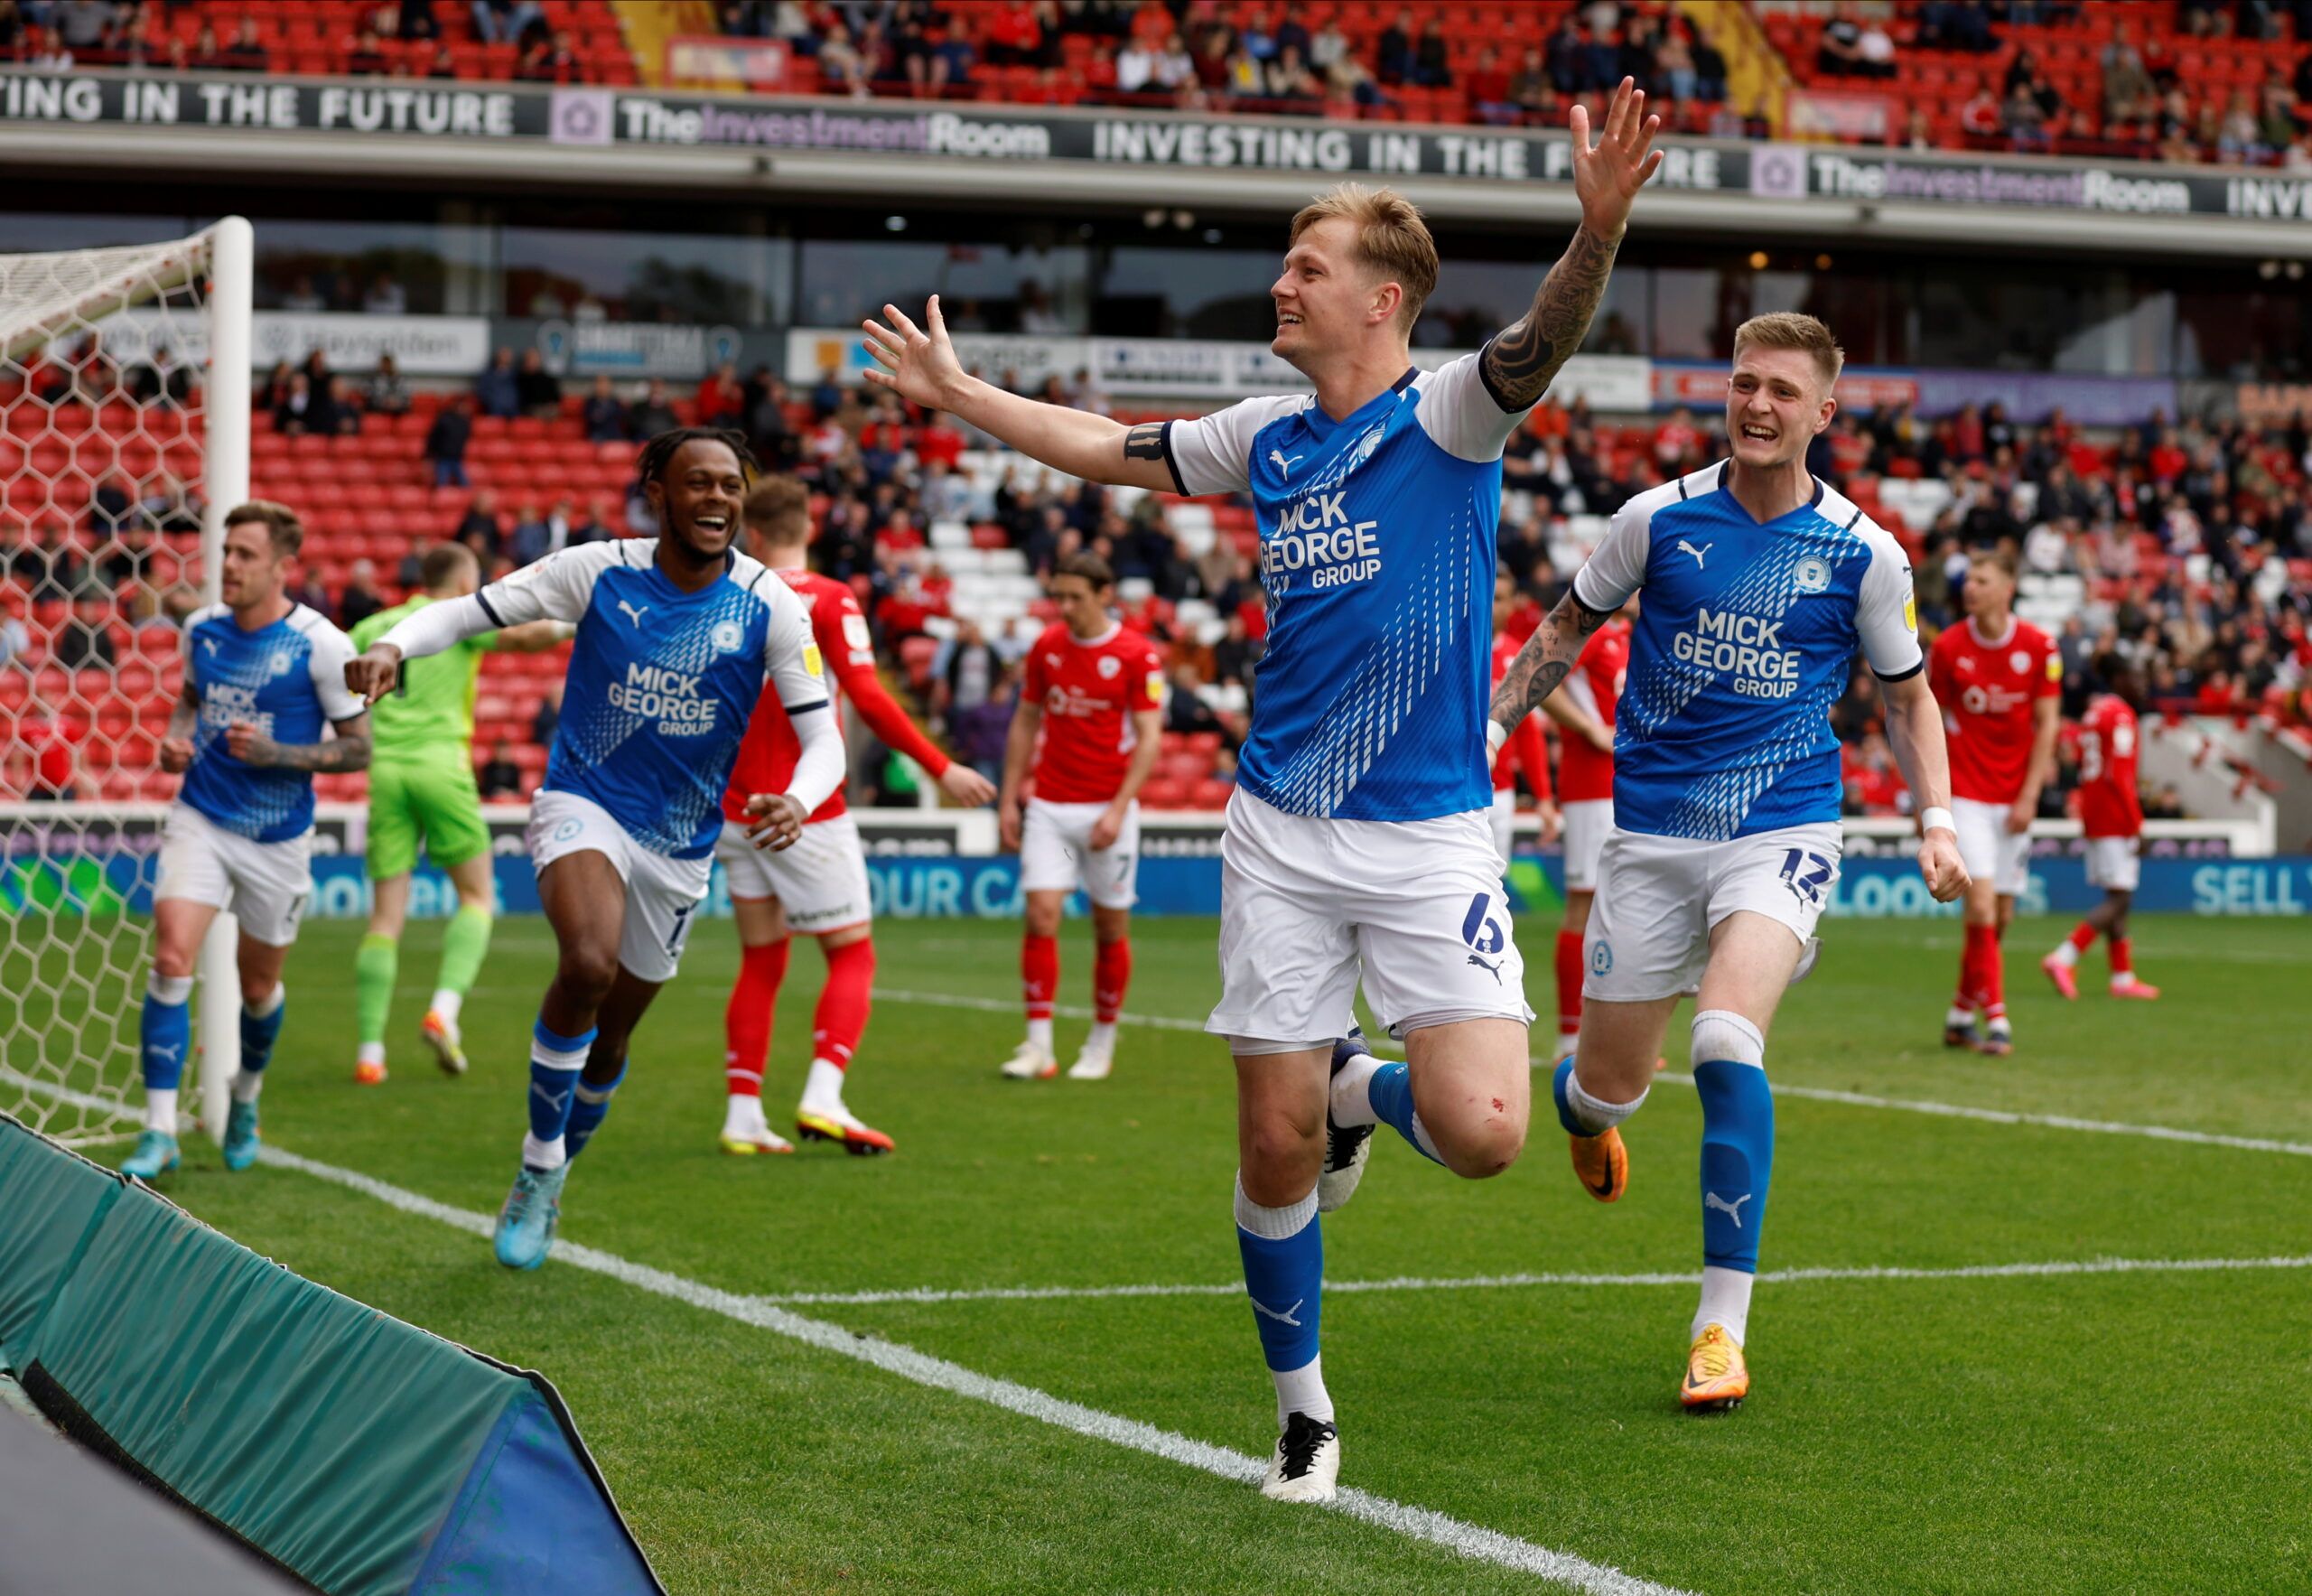 Soccer Football - Championship - Barnsley v Peterborough United - Oakwell, Barnsley, Britain - April 18, 2022 Peterborough United's Frankie Kent celebrates scoring their second goal  Action Images/Jason Cairnduff  EDITORIAL USE ONLY. No use with unauthorized audio, video, data, fixture lists, club/league logos or 